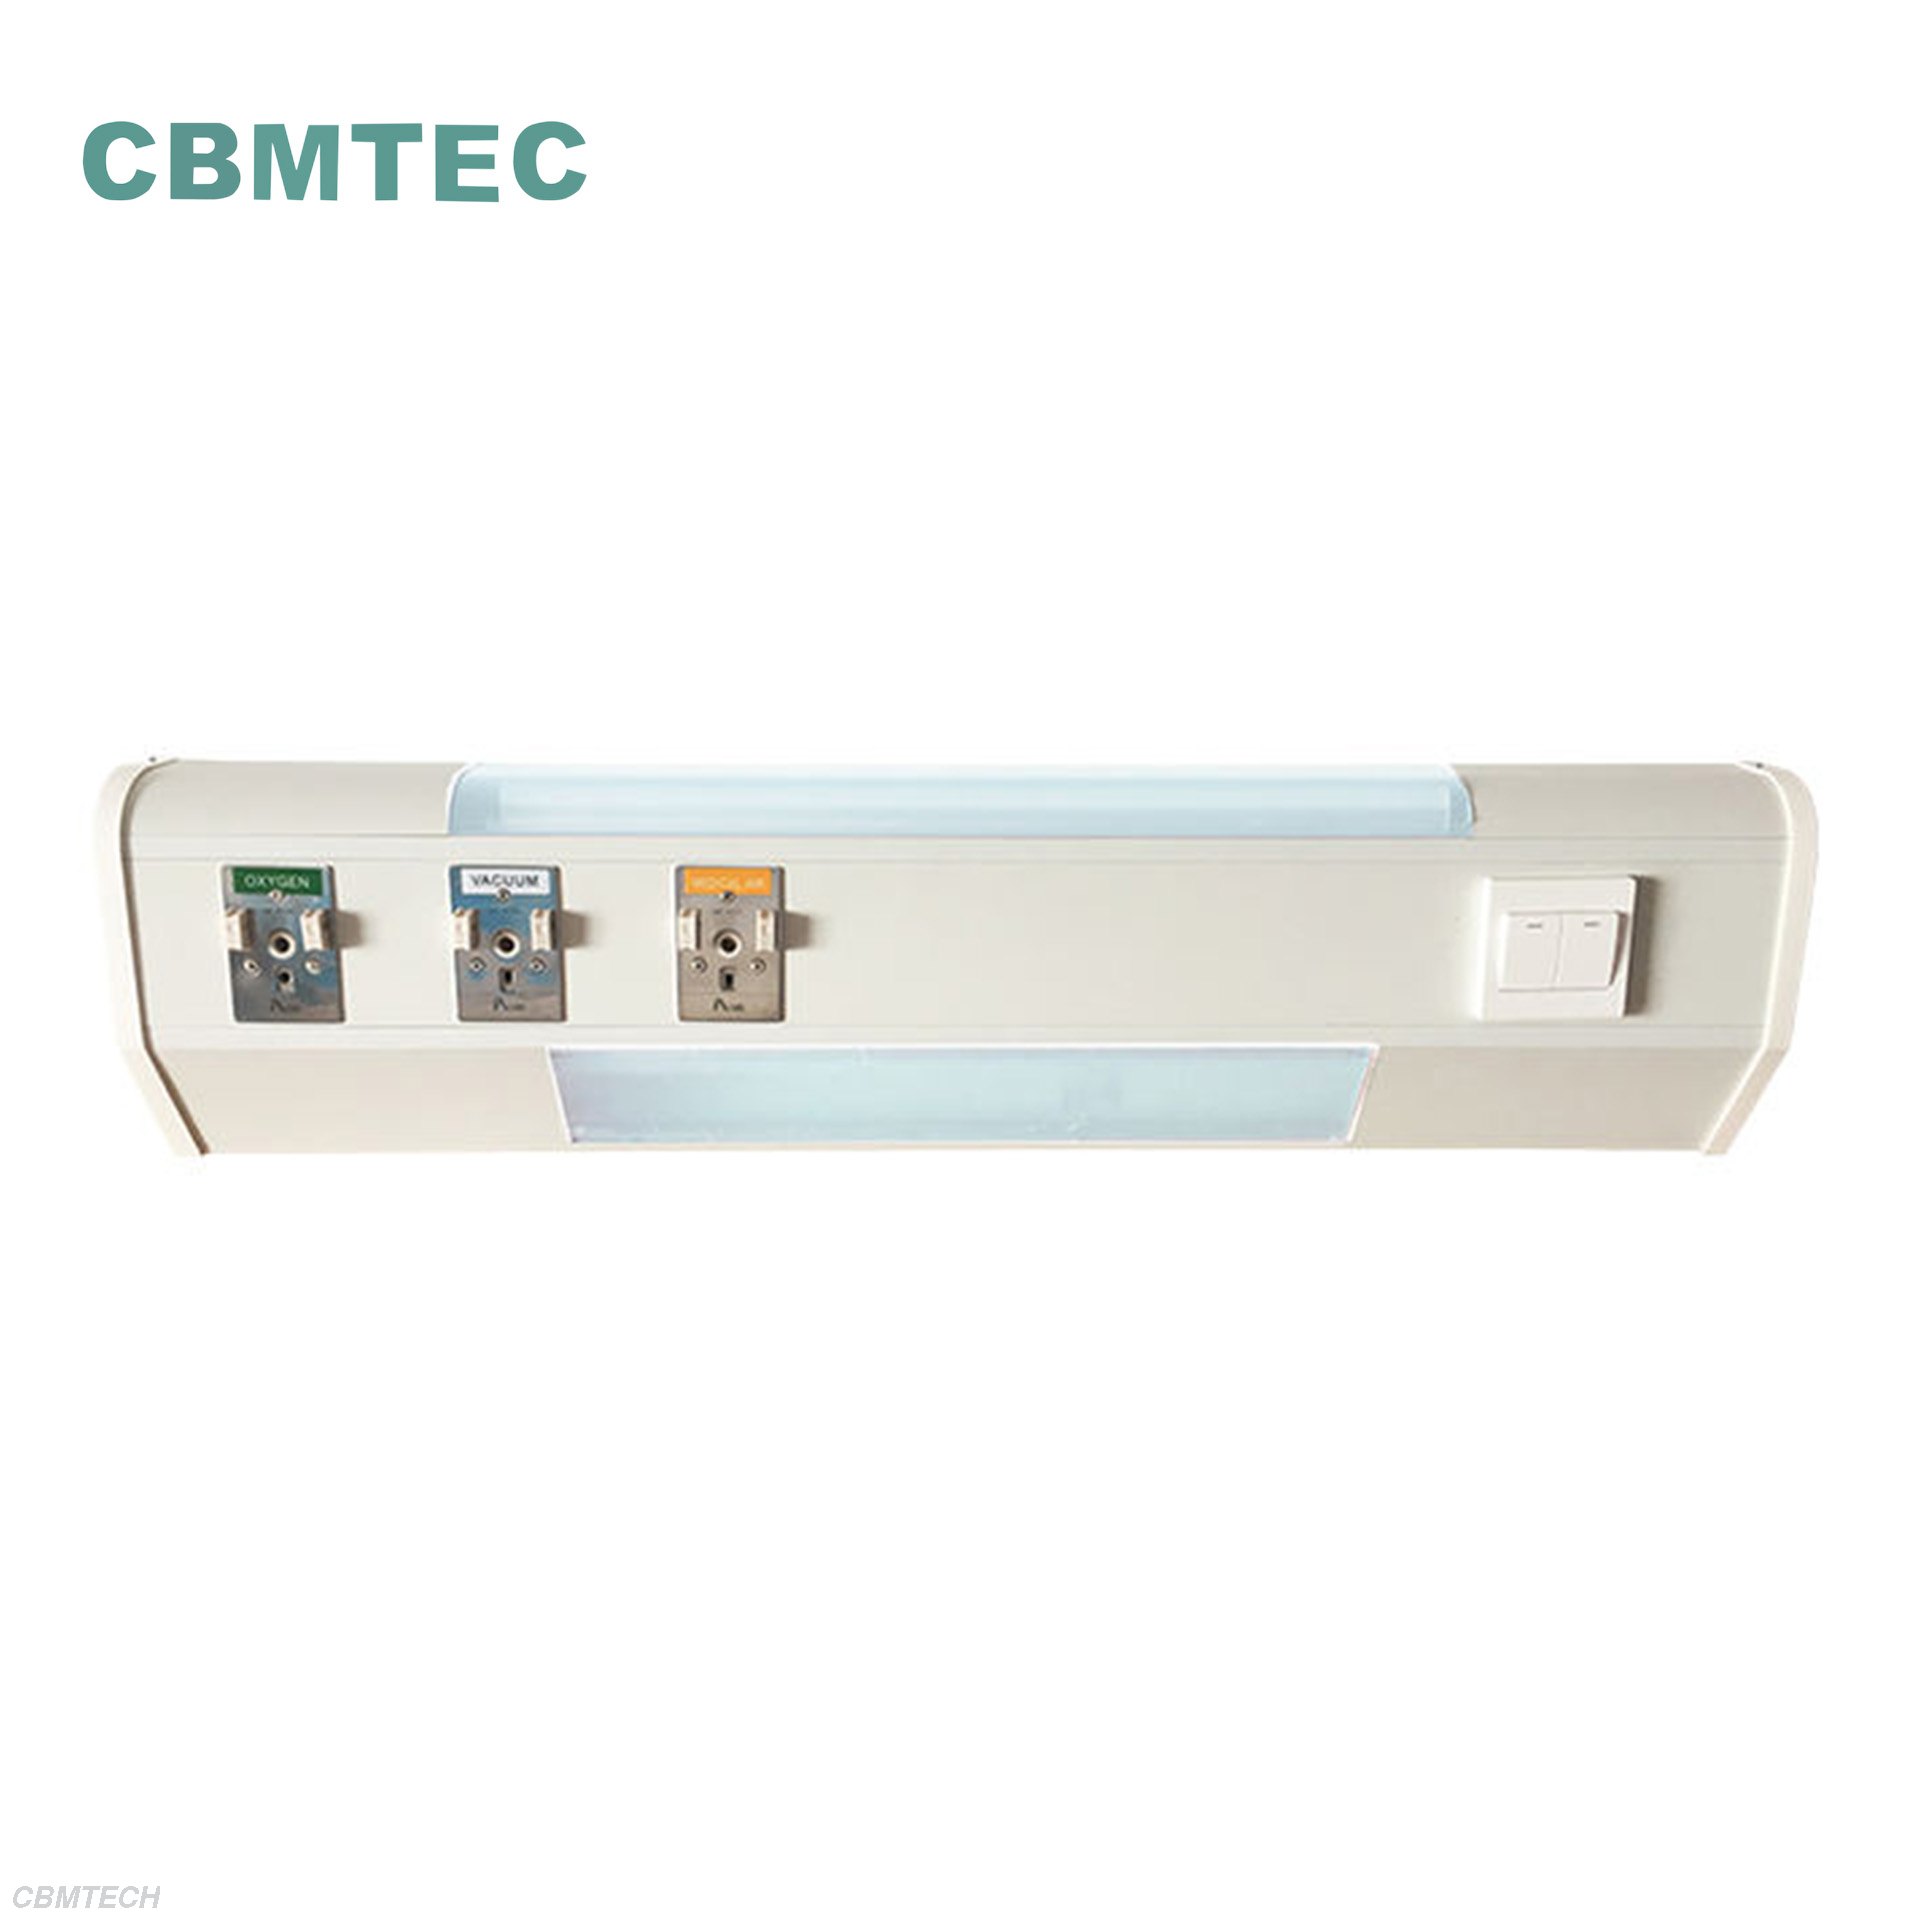 Monoclinic Horizontal Surface Bed Head Panel with Chemetron-type Gas Outlets